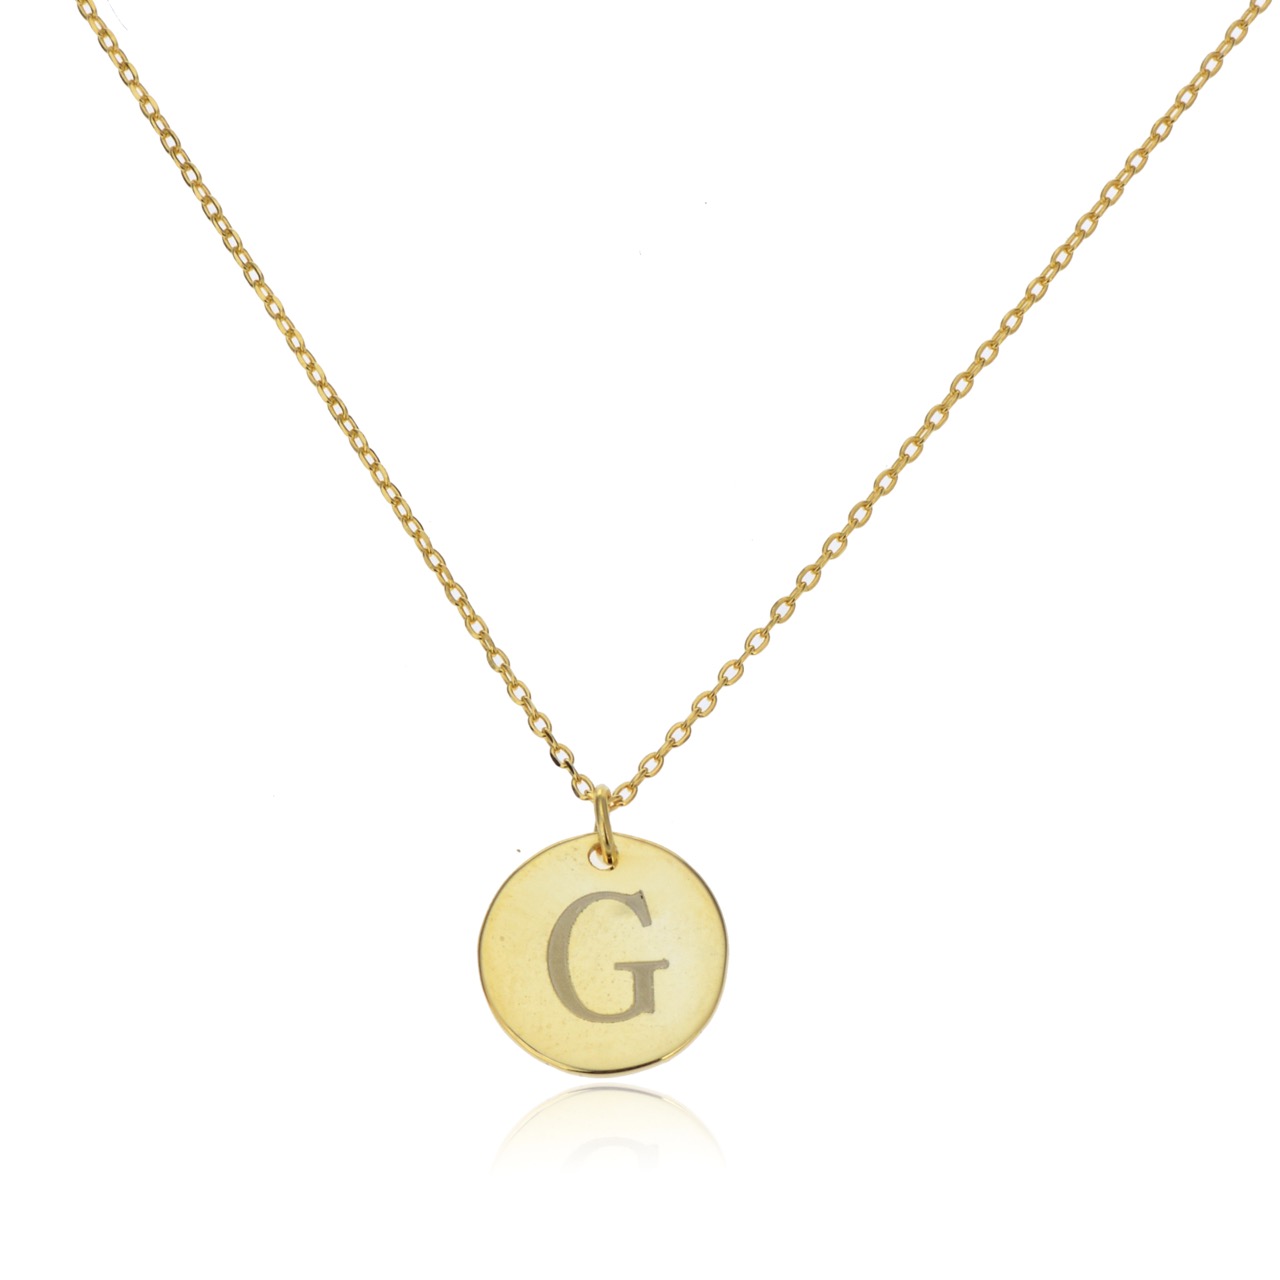 Silver 925 Initial Letter Necklace - G - LEPUS Gift Shops